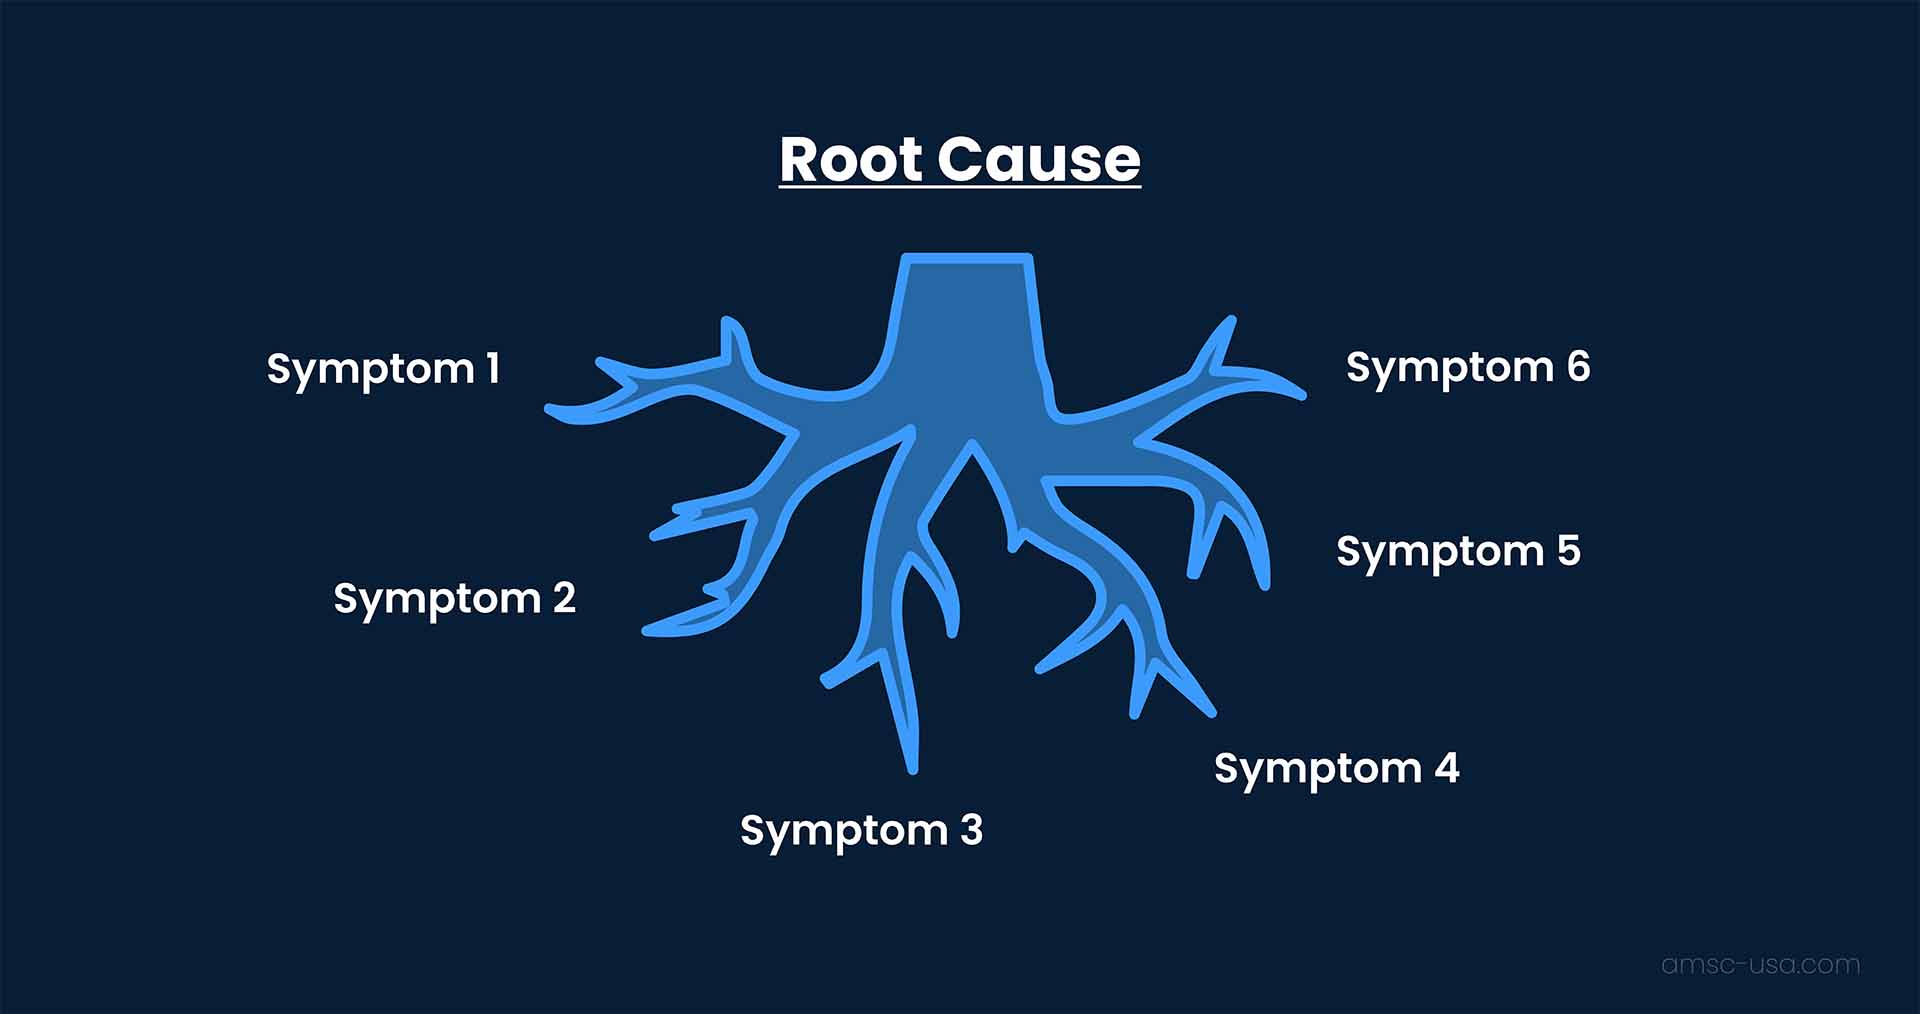 A graphic showing a tree root as an example of root cause analysis